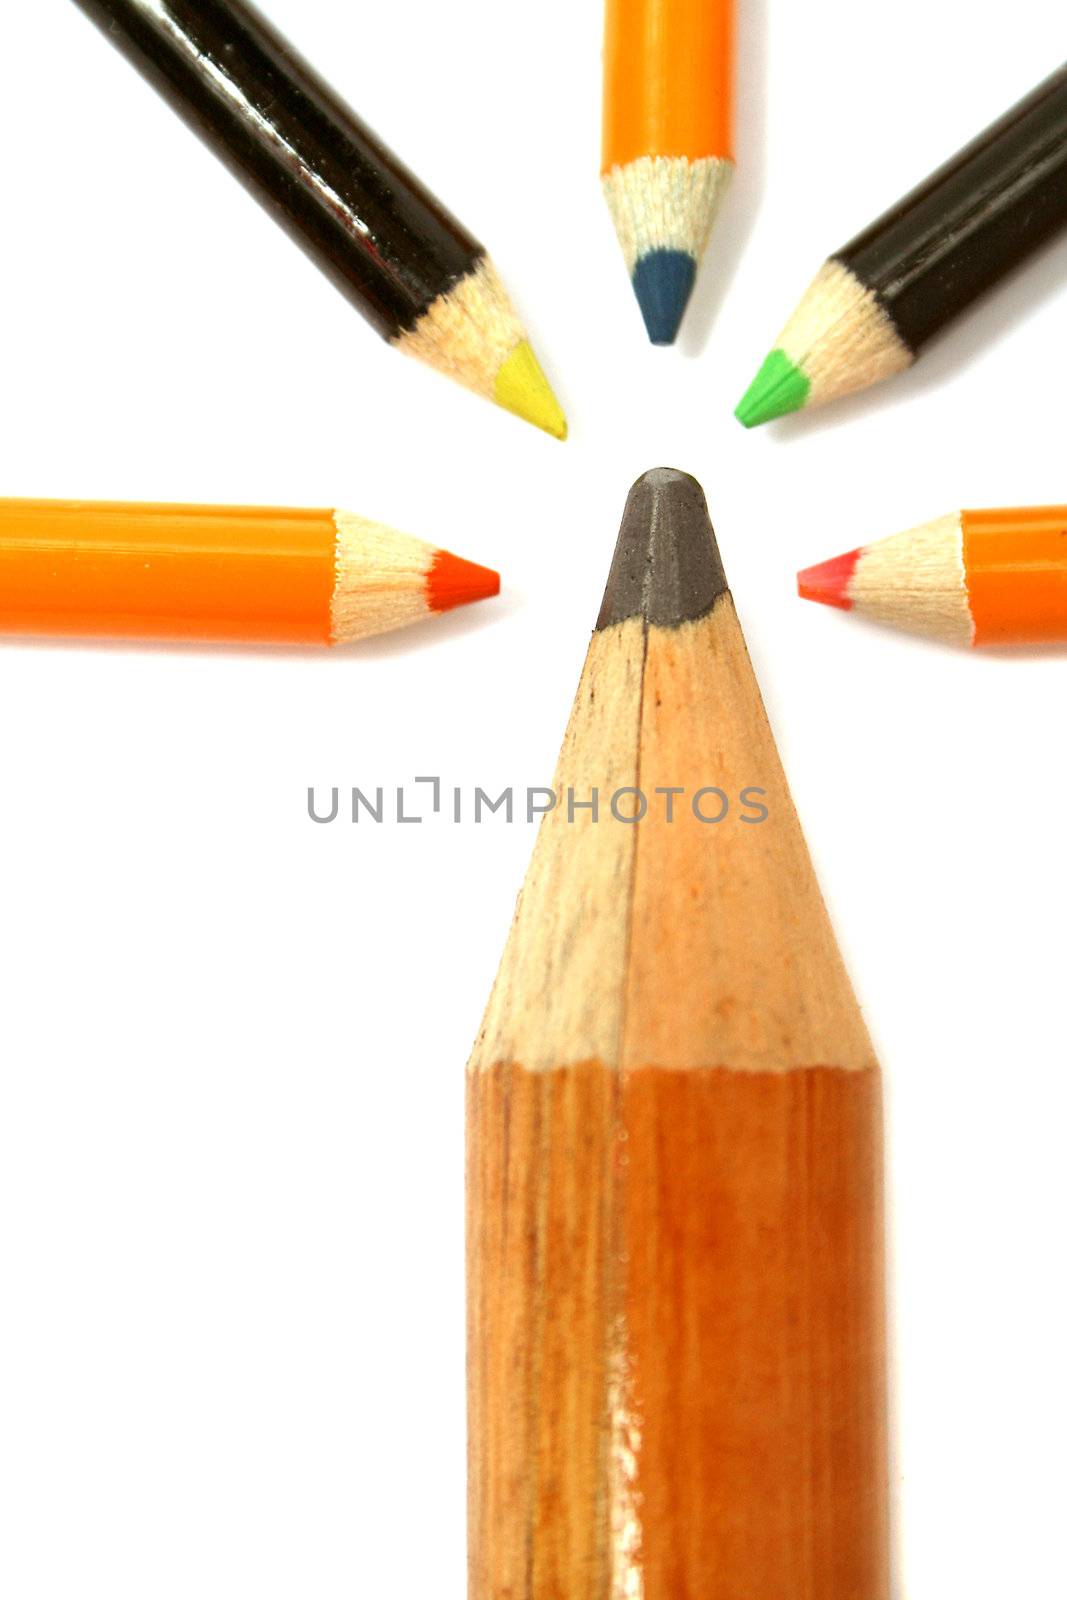 The big pencil and five small color pencils on a vertical  by parrus